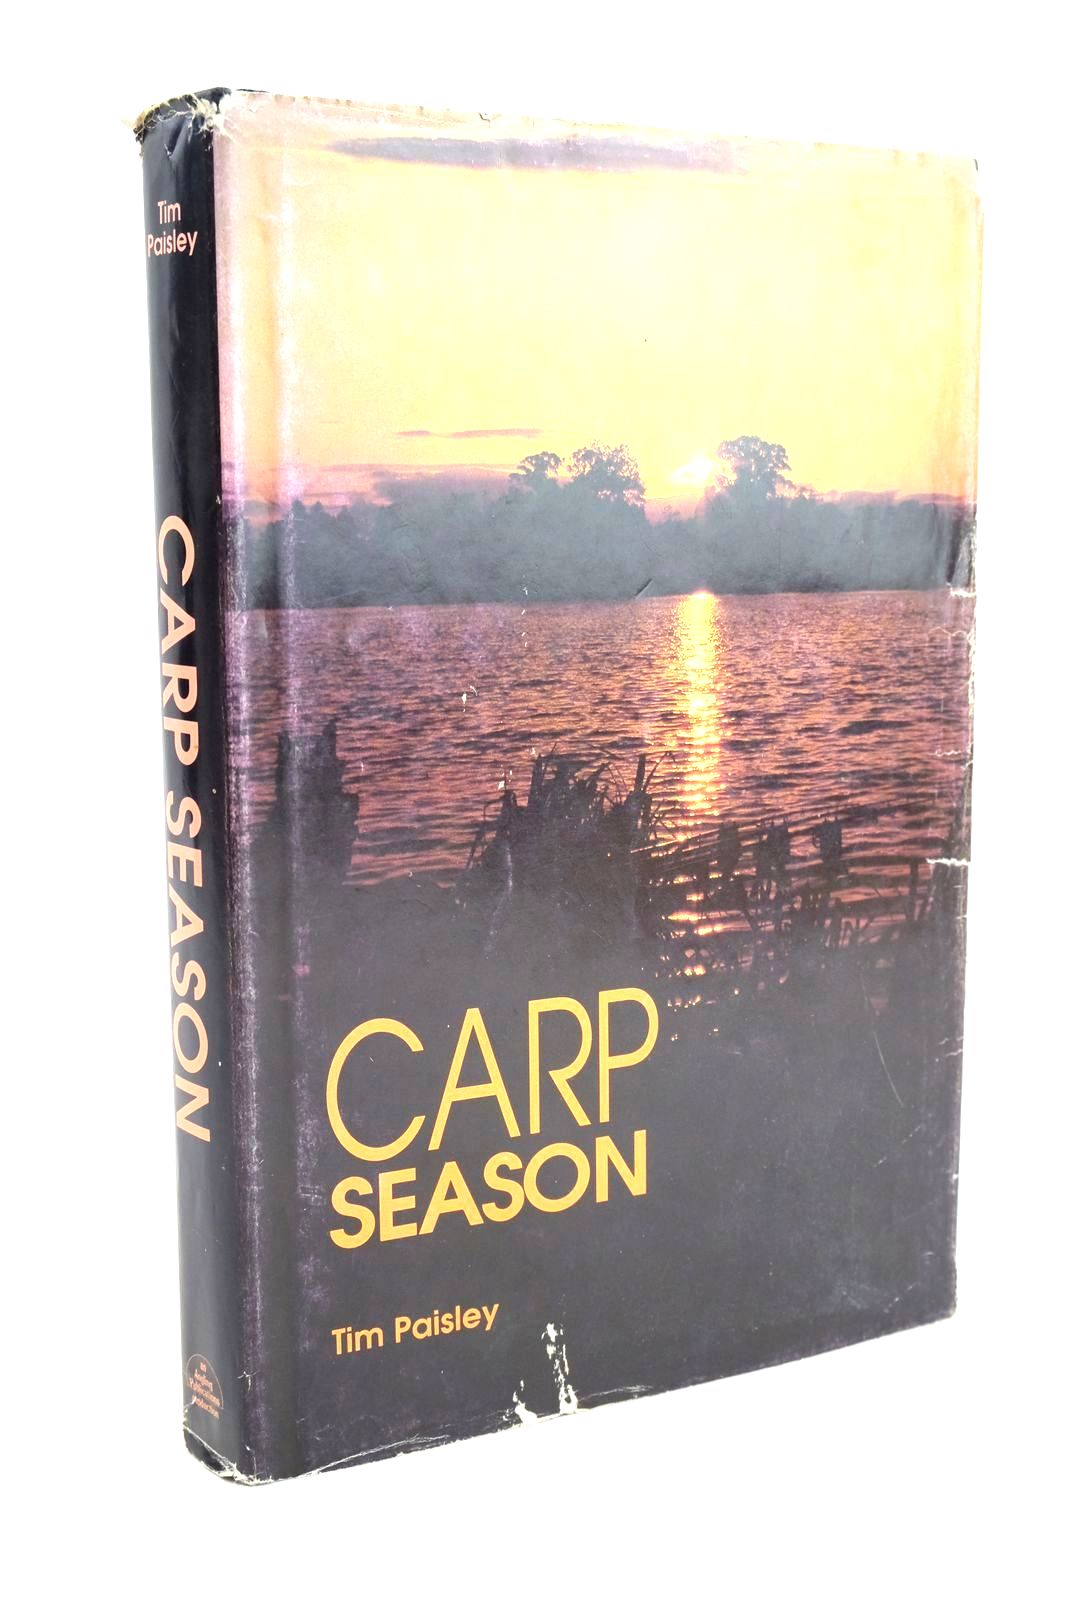 Photo of CARP SEASON written by Paisley, Tim published by Angling Publications (STOCK CODE: 1327511)  for sale by Stella & Rose's Books